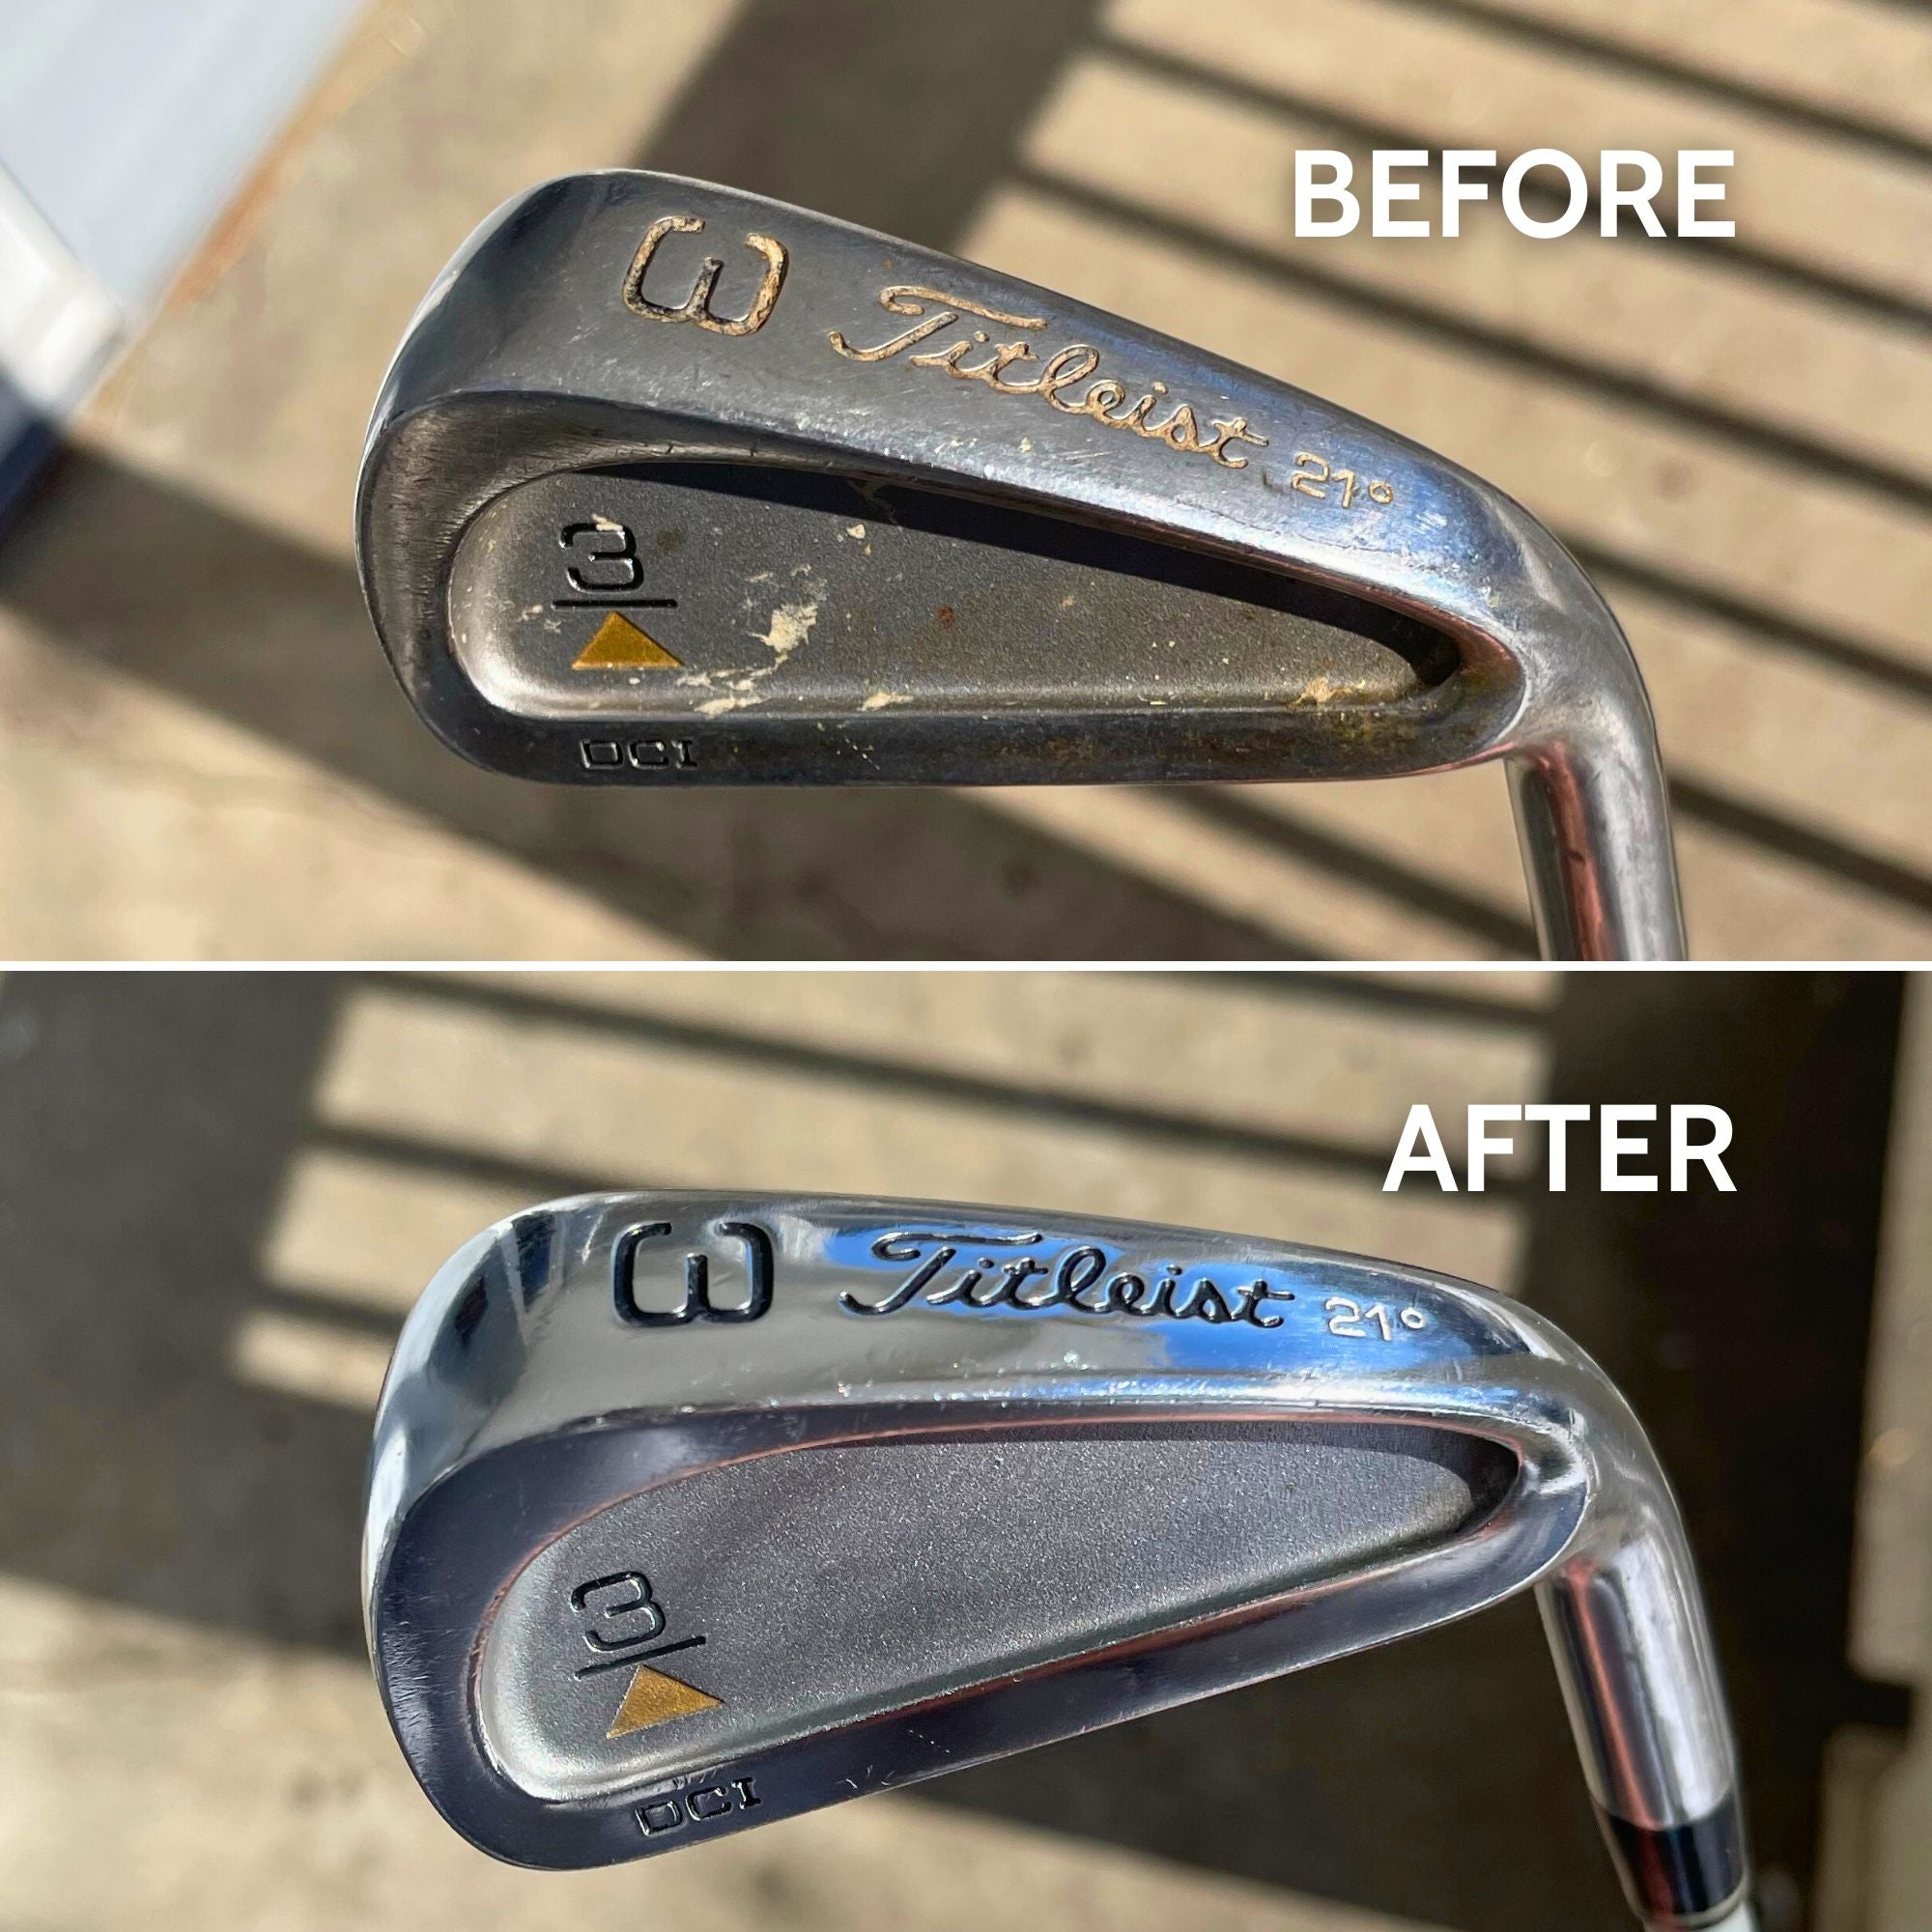 Before and after comparison of a golf club, showing noticeable improvement in cleanliness and shine after using Club Doctor's Golf Club Care Kit.